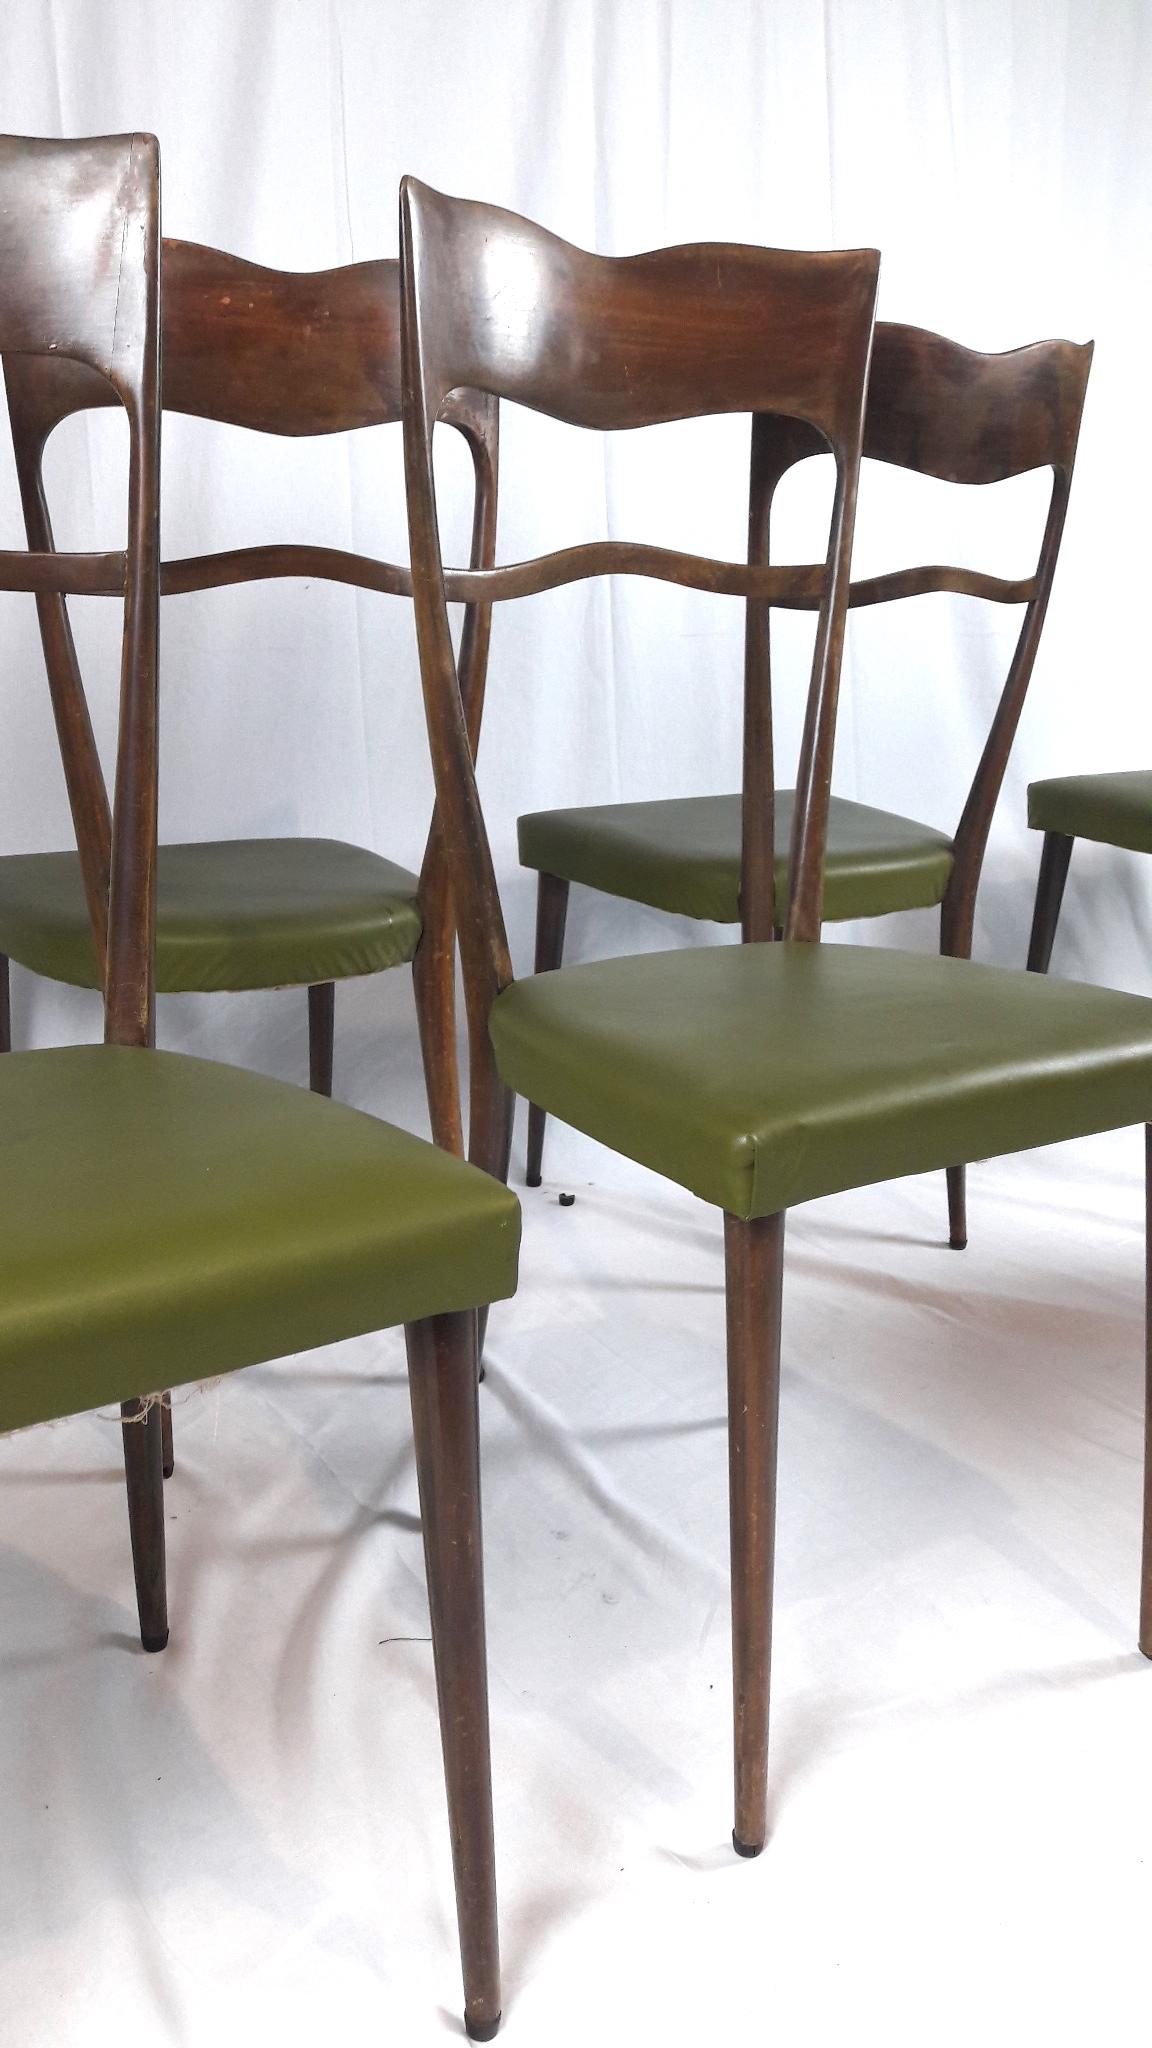 20th Century Mid-Century Modern Set of Six High-Back Beechwood and Green Italian Chairs For Sale